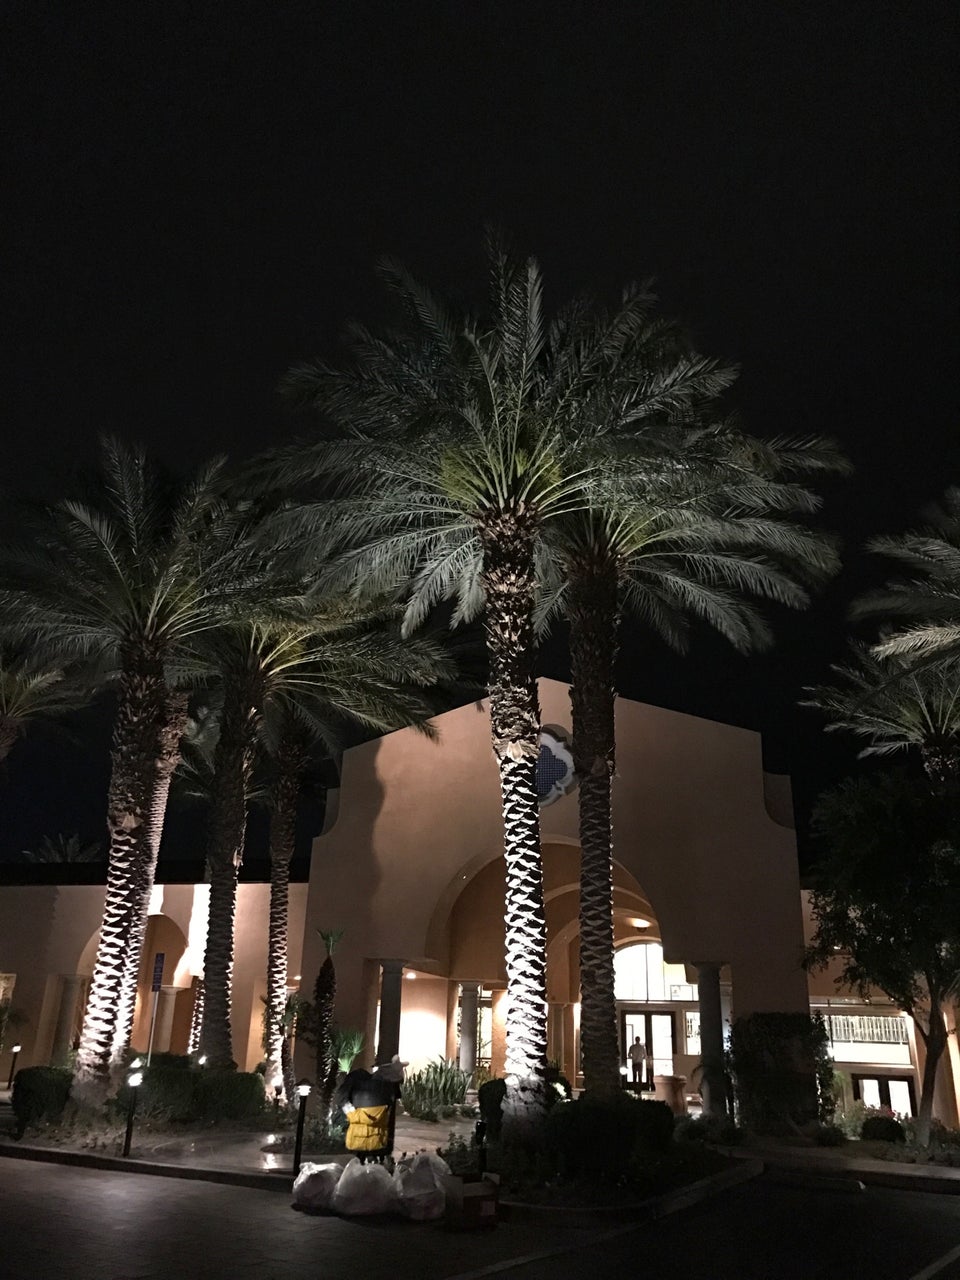 Photo of The Westin Mission Hills Resort Villas, Palm Springs